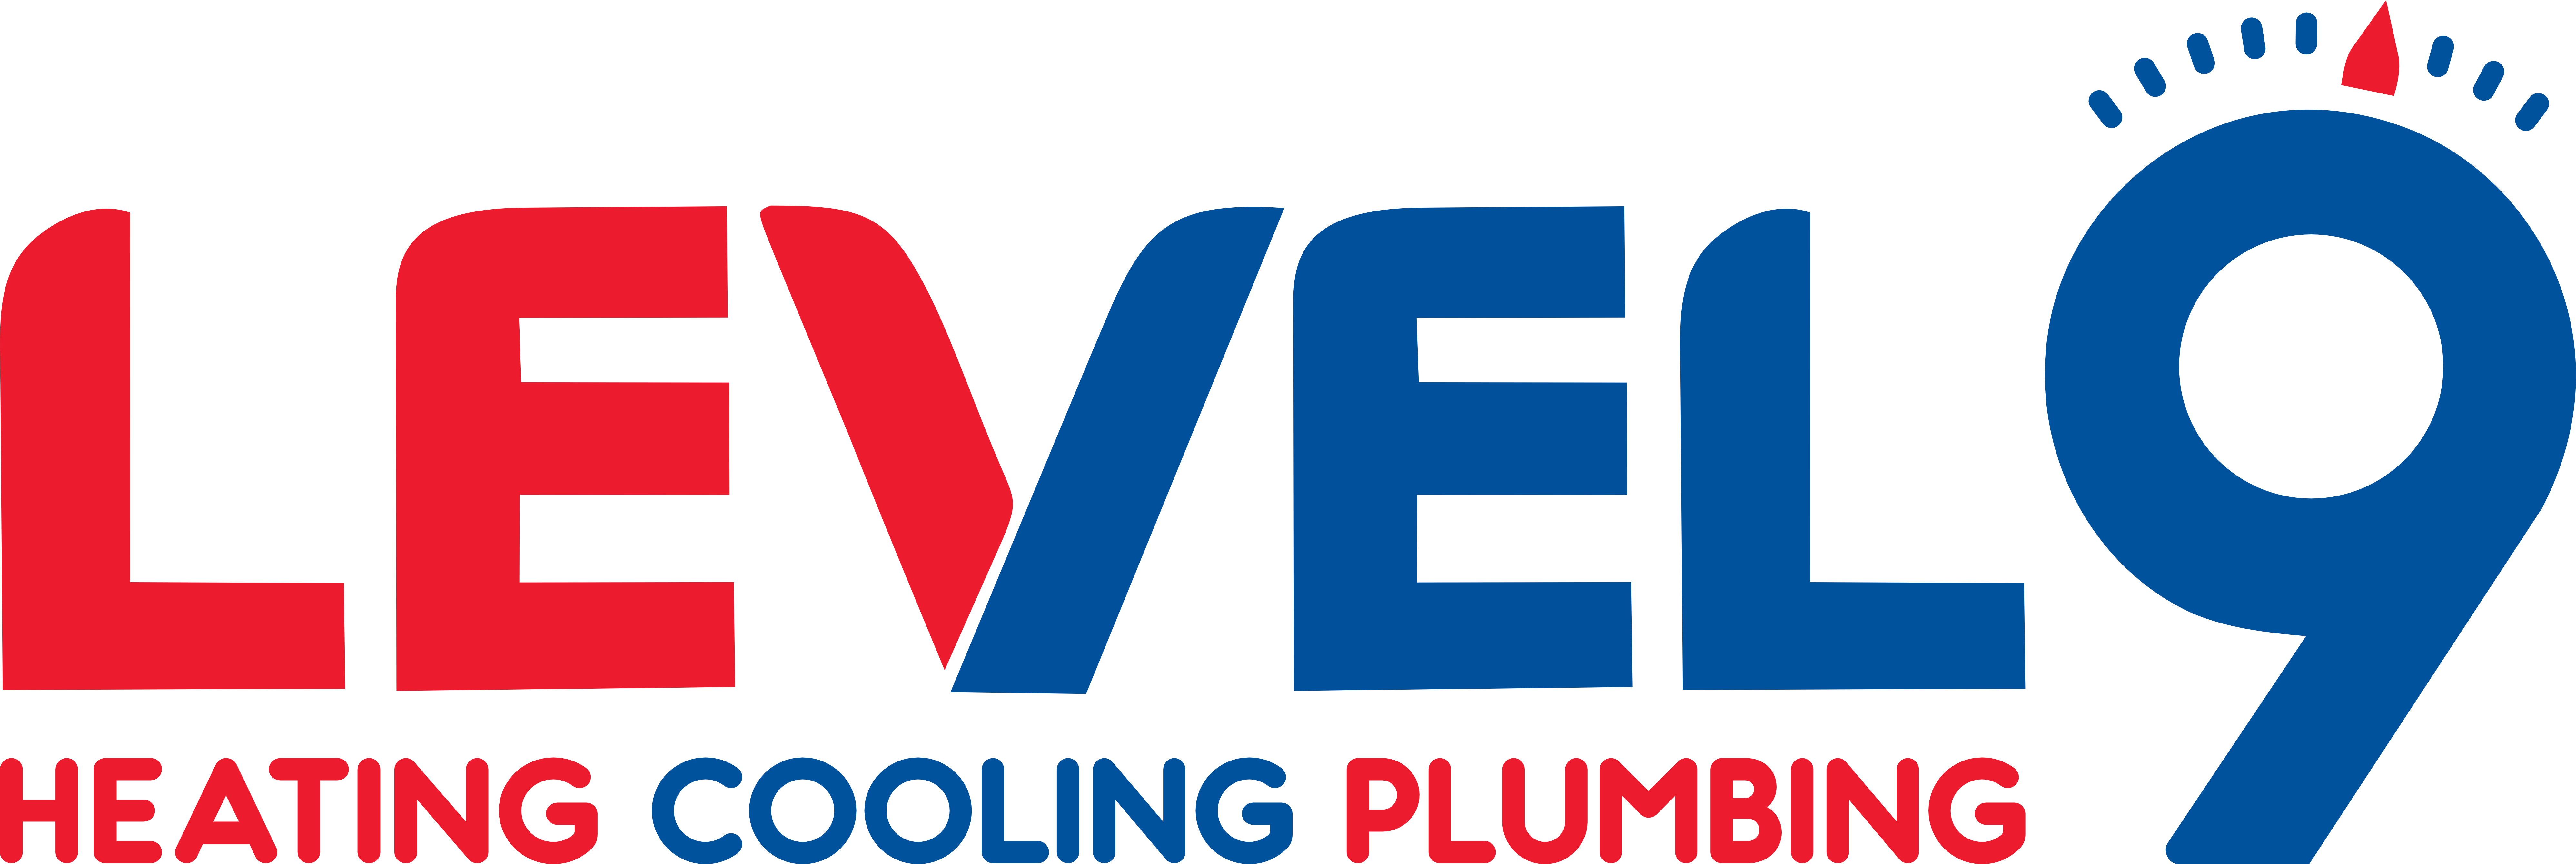 Level 9 Heating, Cooling, and Plumbing logo